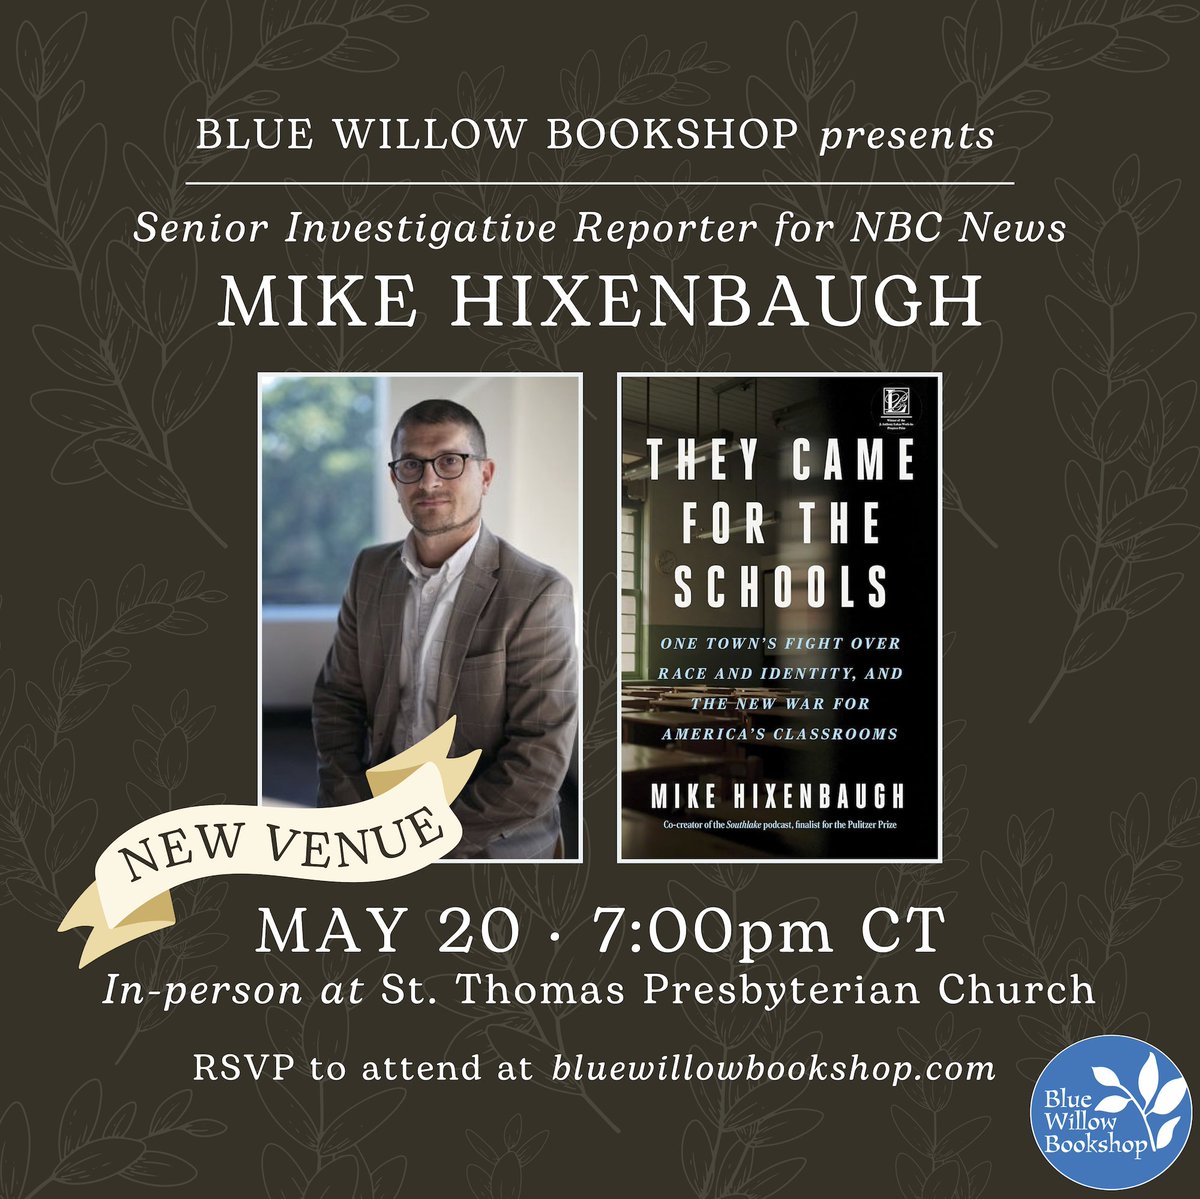 📣 Venue update! Join us next Monday, May 20, for an event with @Mike_Hixenbaugh at St. Thomas Presbyterian Church, right down the street from the bookshop. We look forward to seeing you there, #Houston! Address, details, and RSVP info: bluewillowbookshop.com/event/hixenbau… @MarinerBooks